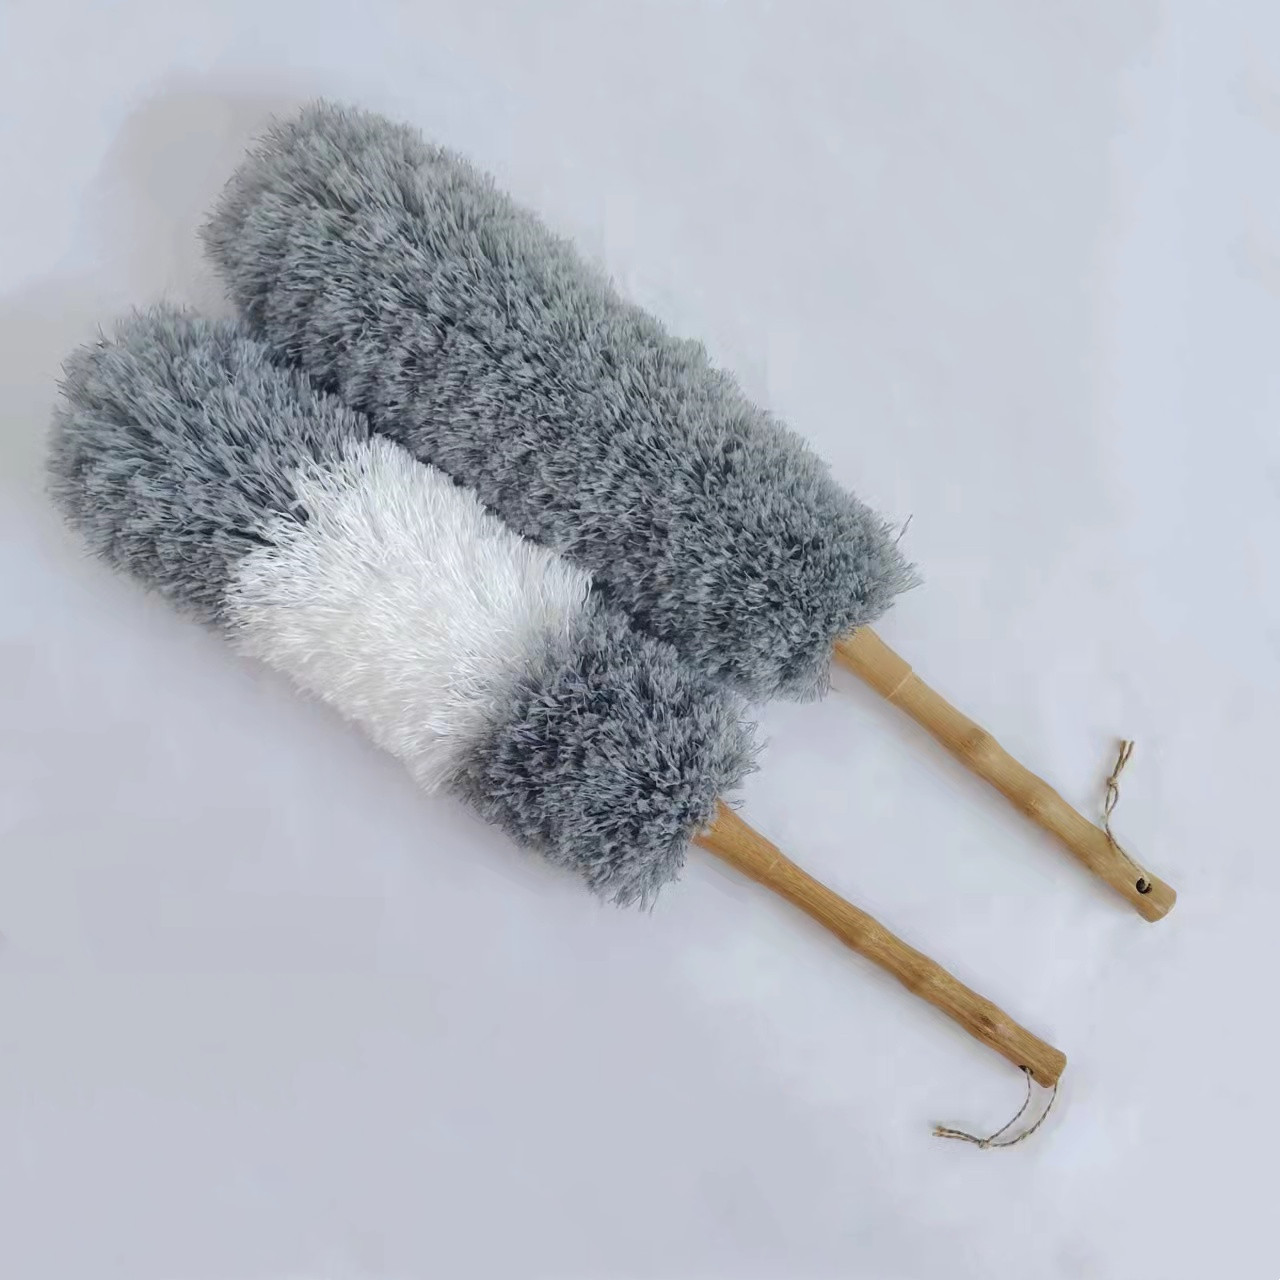 Solid Wood Handle Dust Remove Brush Dust Sweeping Fiber Duster Imitation Feather Duster Duster Household Lint-Free Cleaning Ash Removal Cleaning 0766